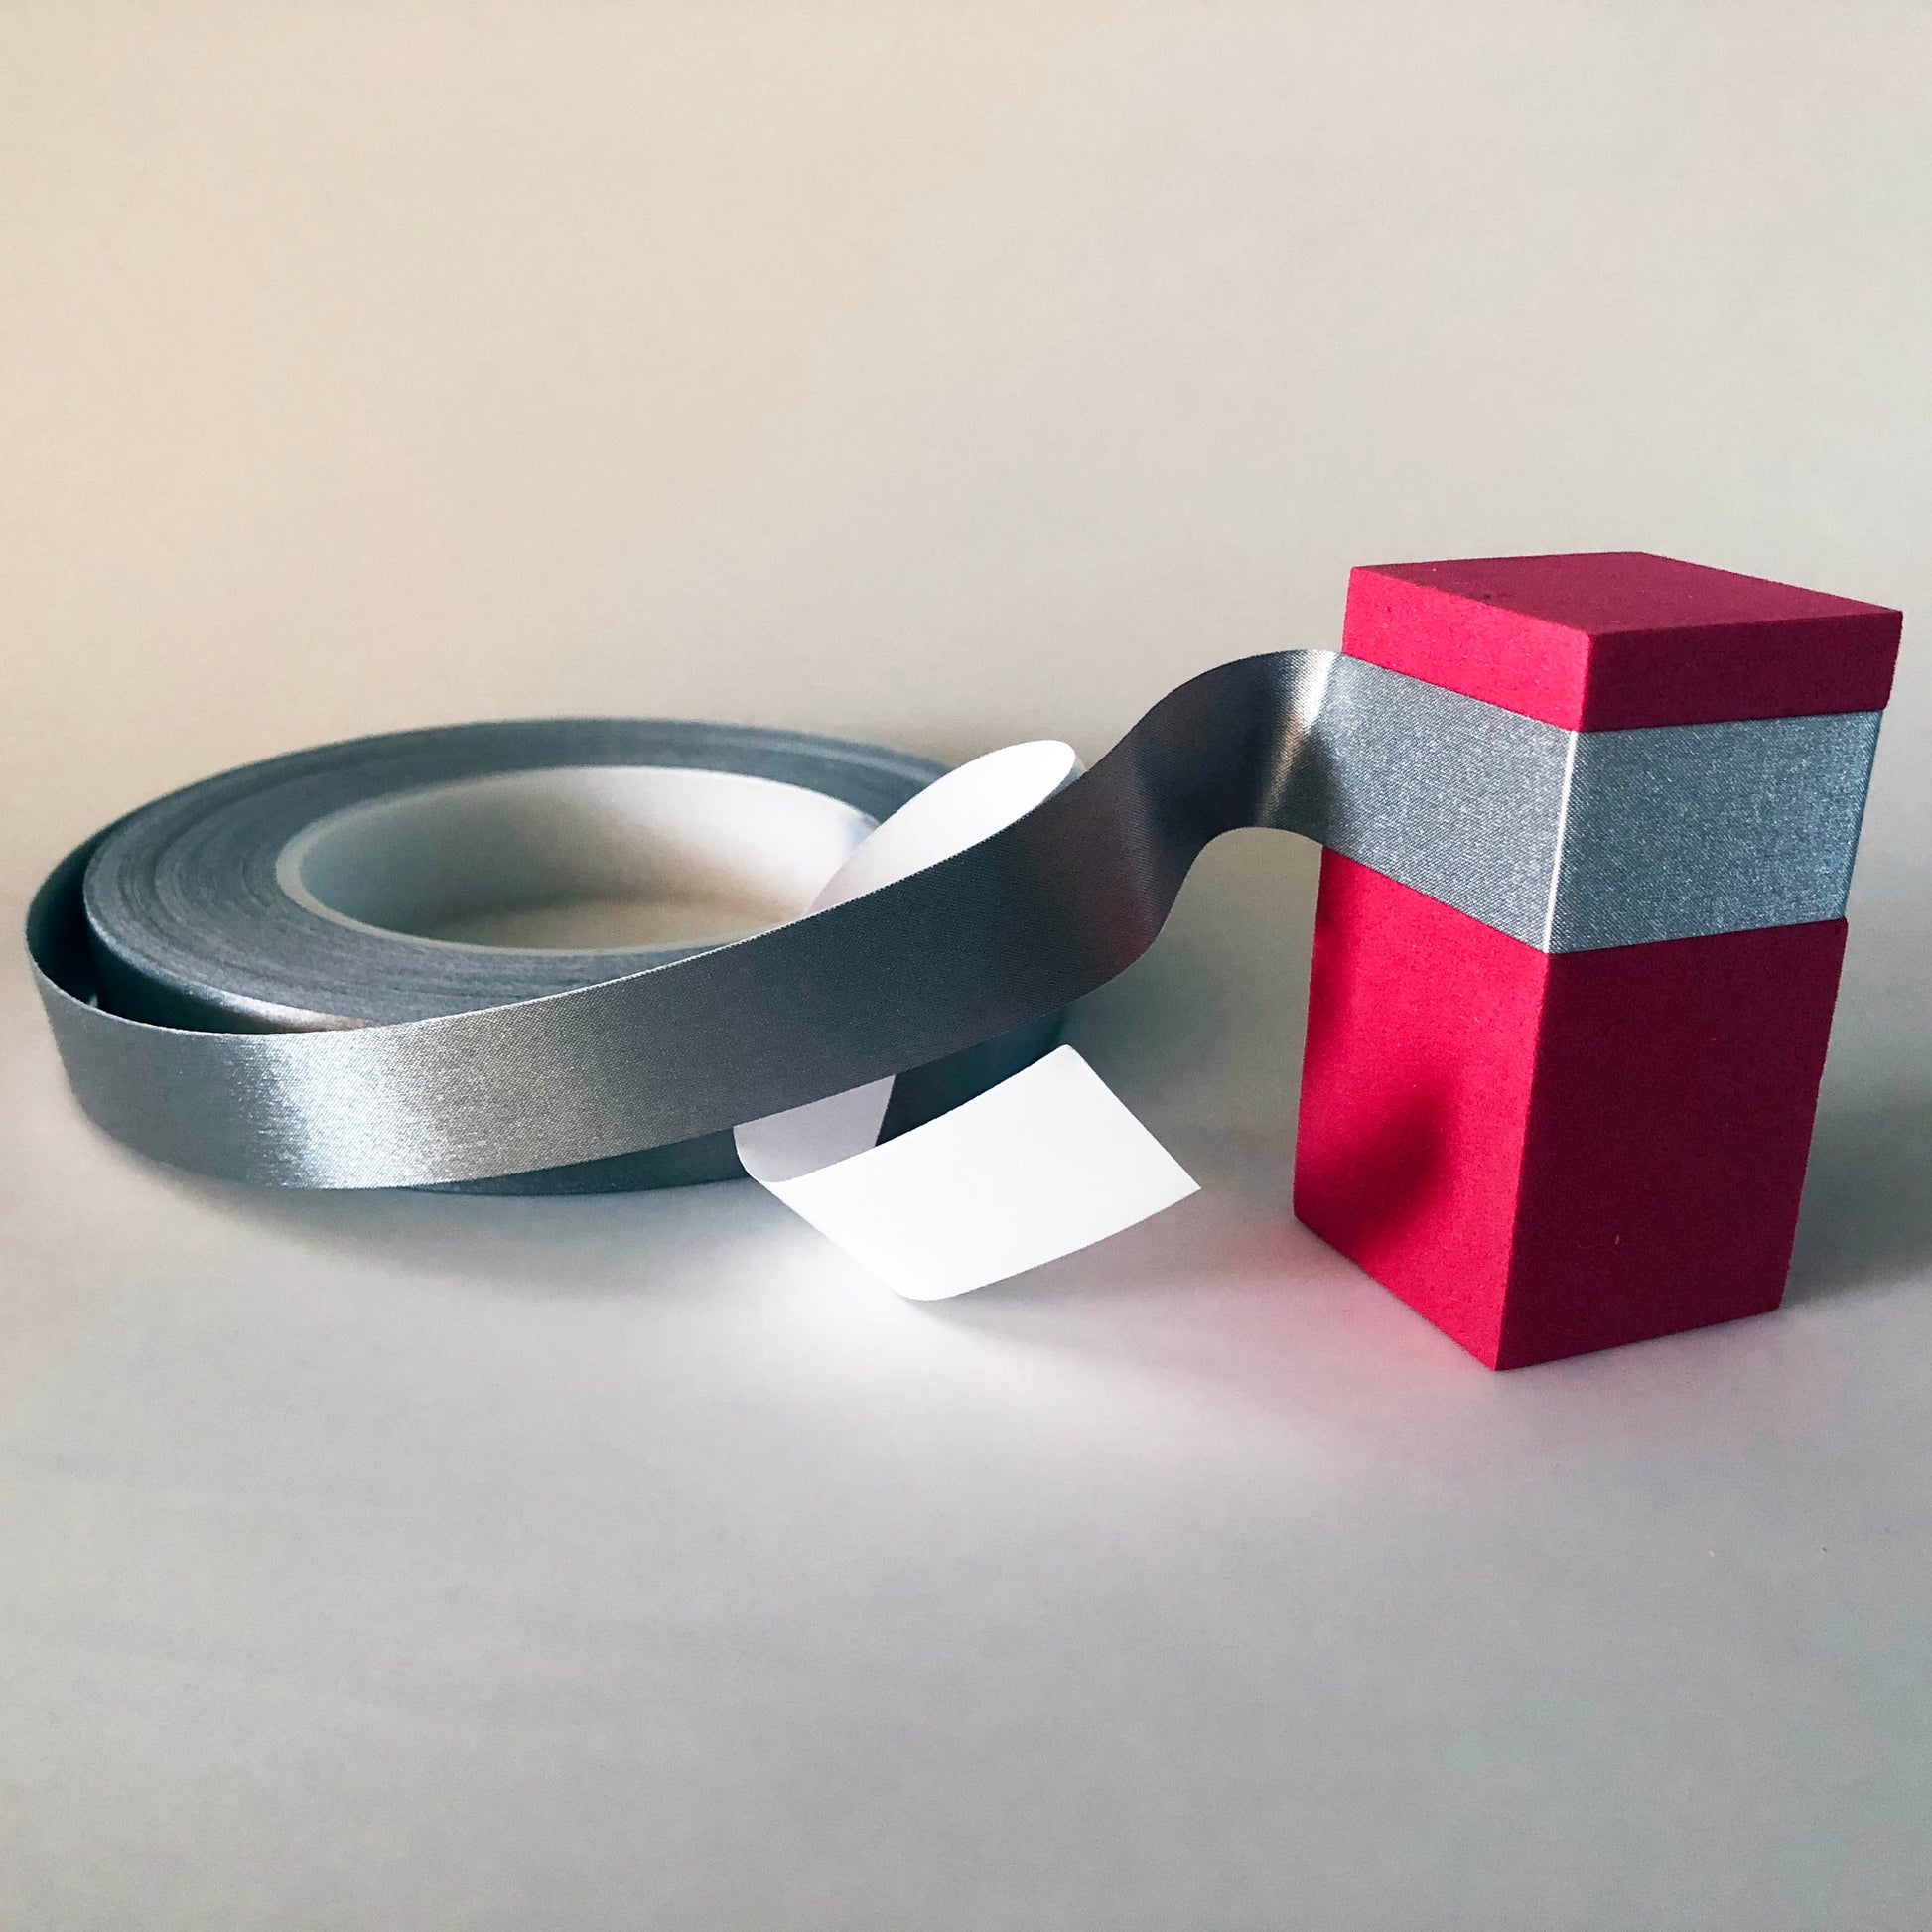 A roll of conductive tape with the end flexed around and attached to a red foam block. the white backing is still attached